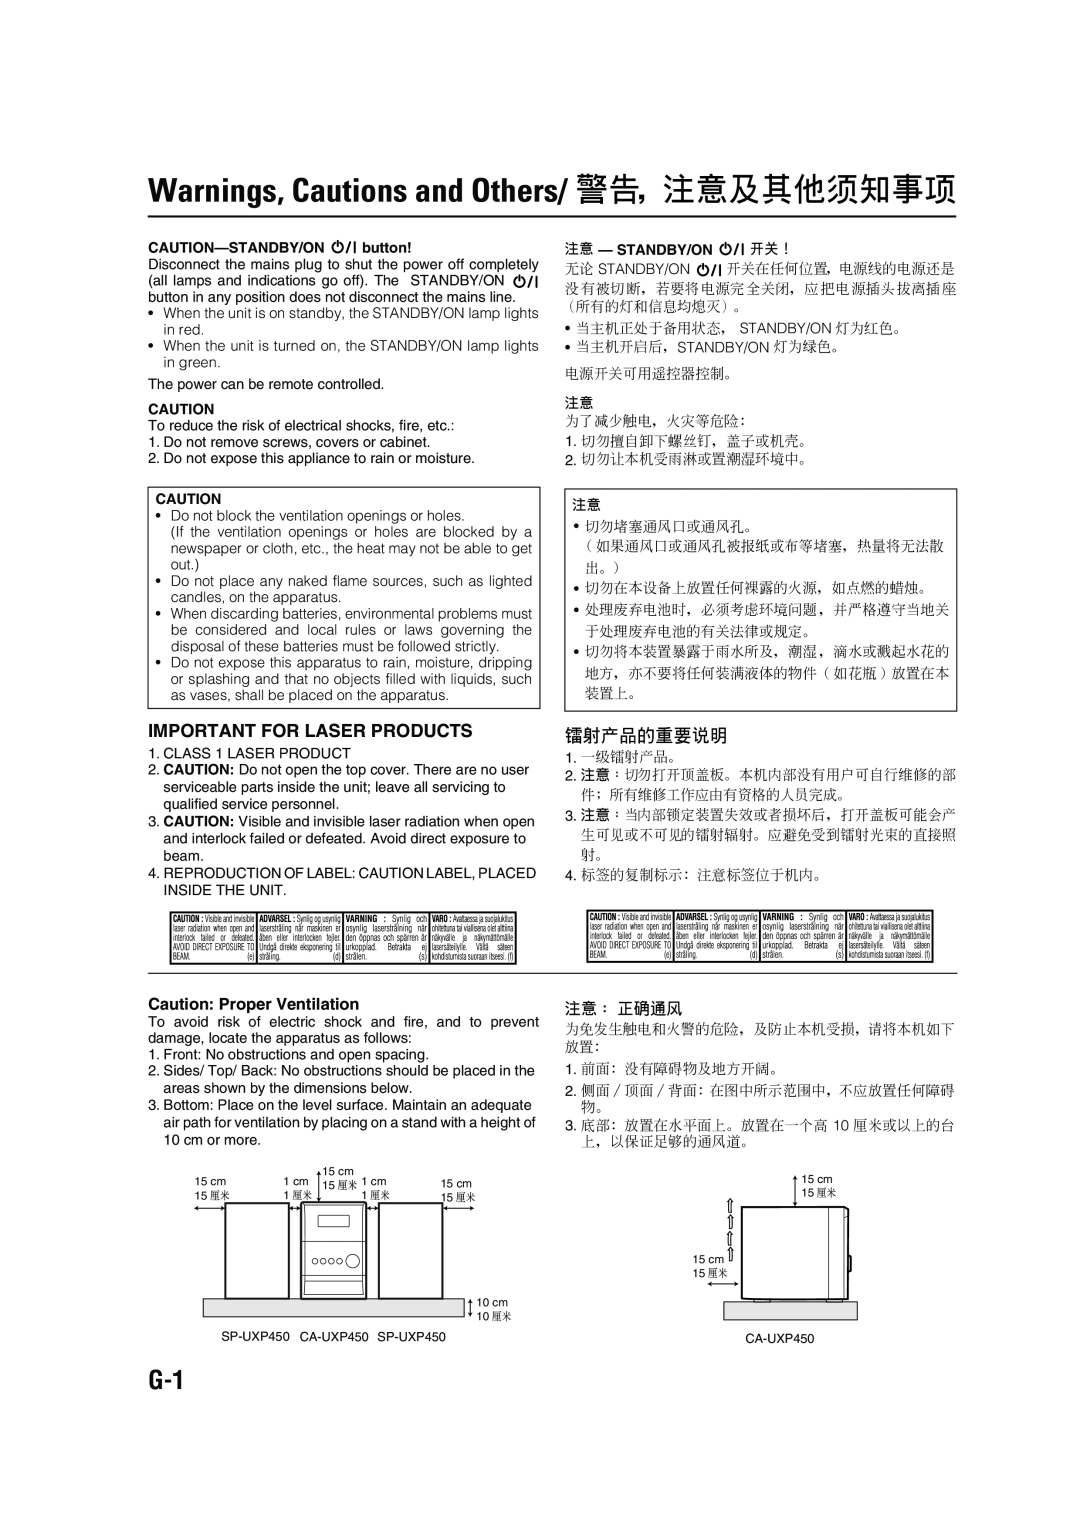 JVC UX-P450 manual Warnings, Cautions and Others/ 警告，注意及其他須知事項, Important For Laser Products, 鐳射產品的重要說明, 注意 : 正确通風 